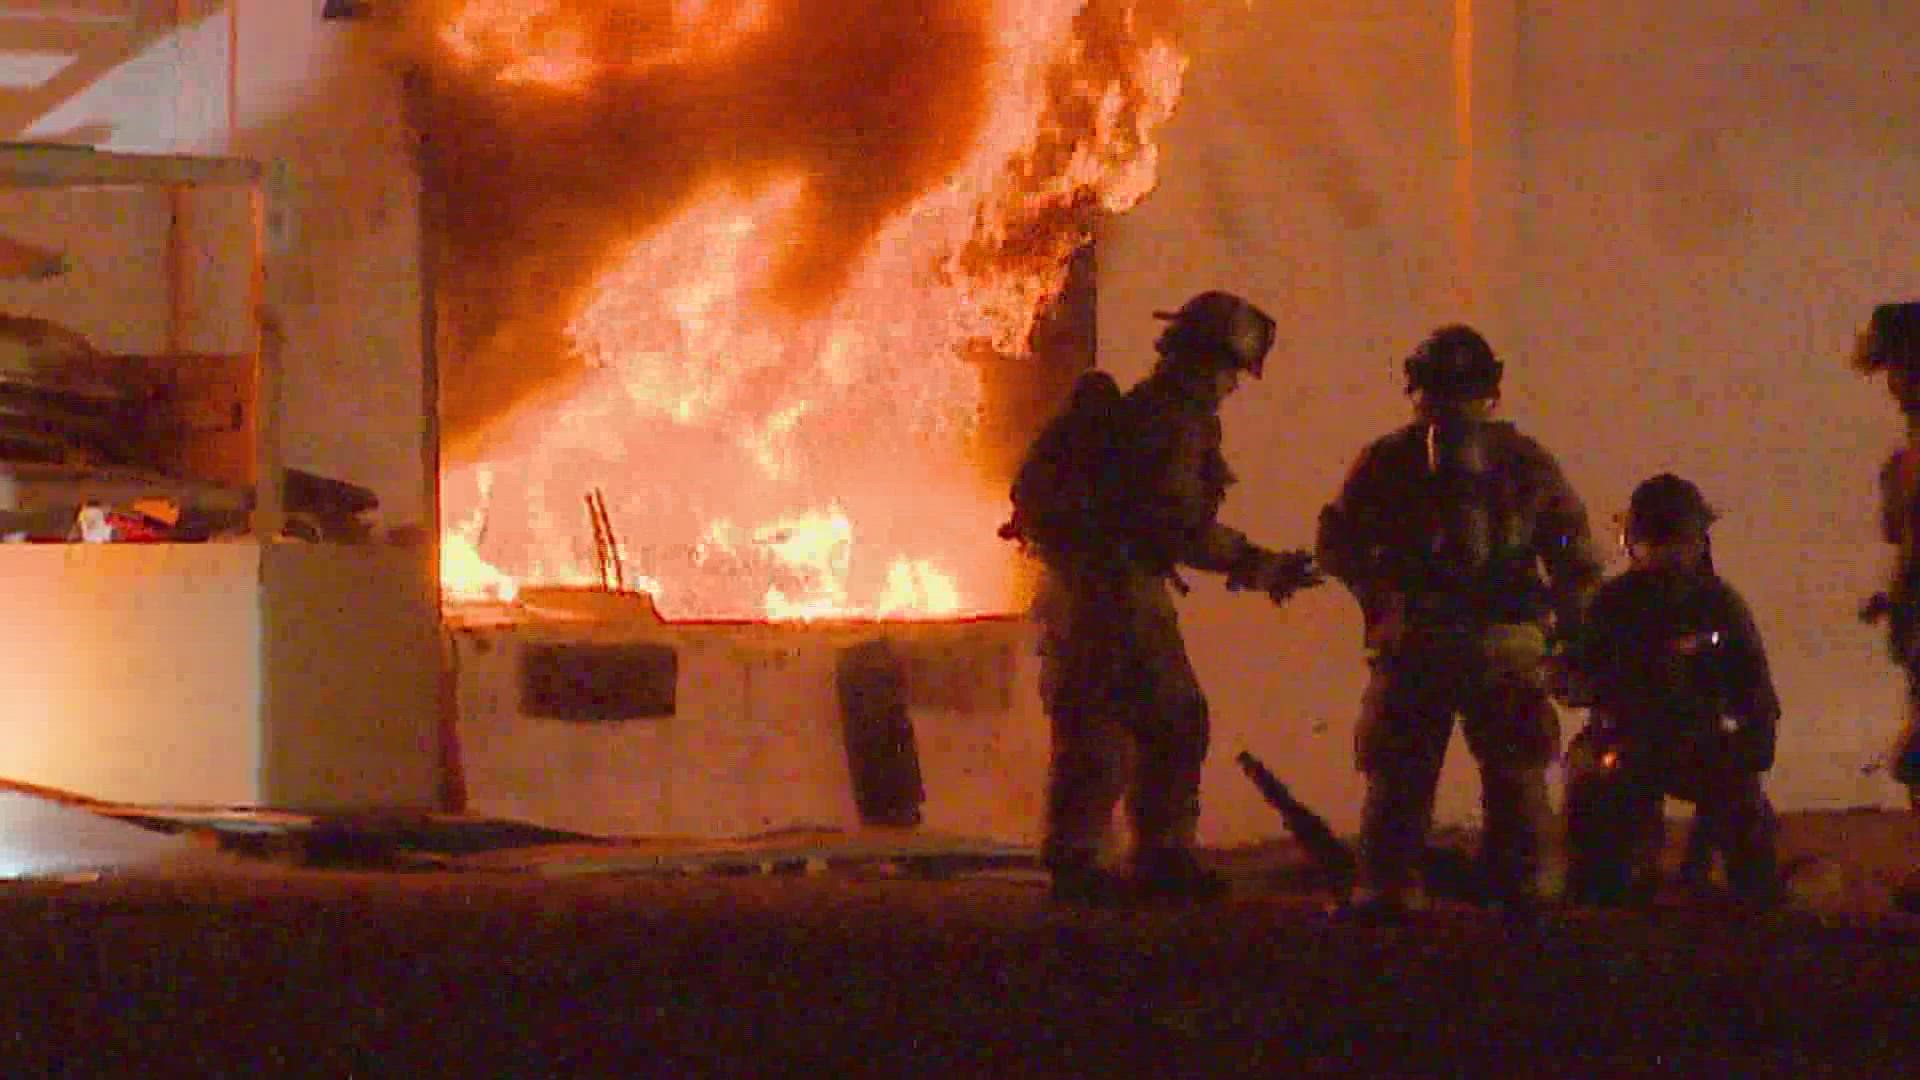 The fire broke out at a pallet warehouse northwest of downtown Fort Worth.